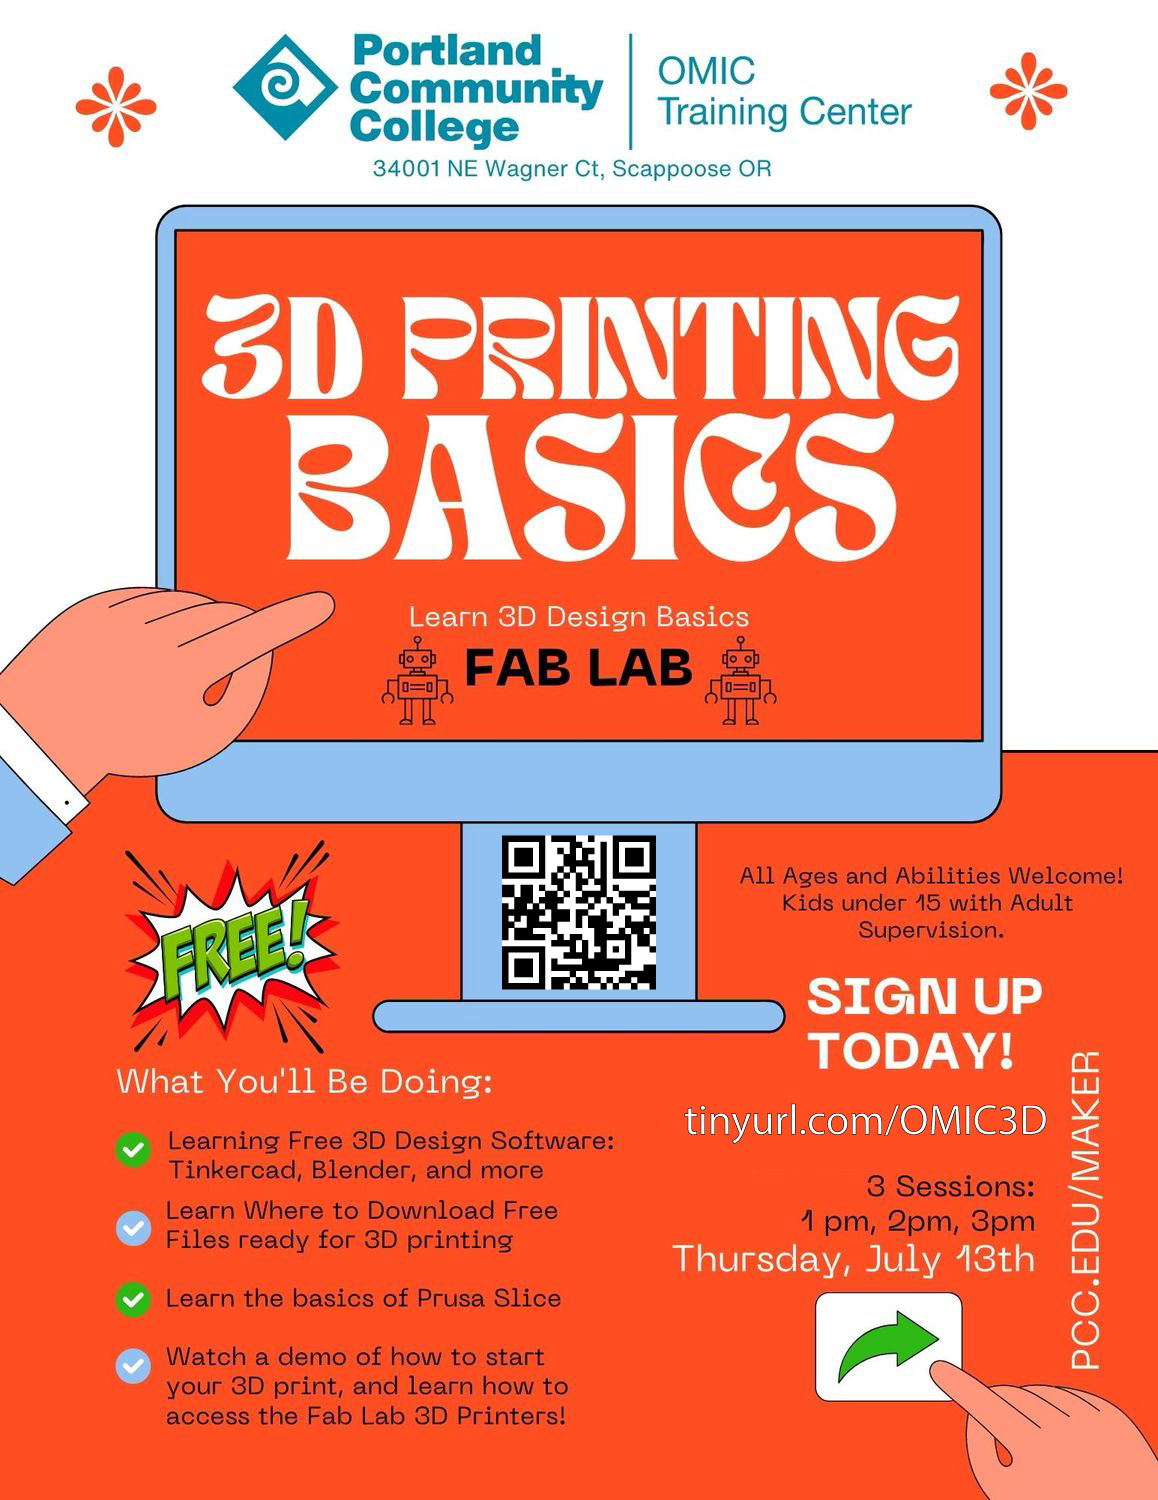 Sign up for a 3D Design for 3D Printing Basics Workshop hosted by the Fab Lab at the PCC OMIC Training Center. Thursday, July 13th at 1pm, 2pm, or 3pm. See the link for more information.